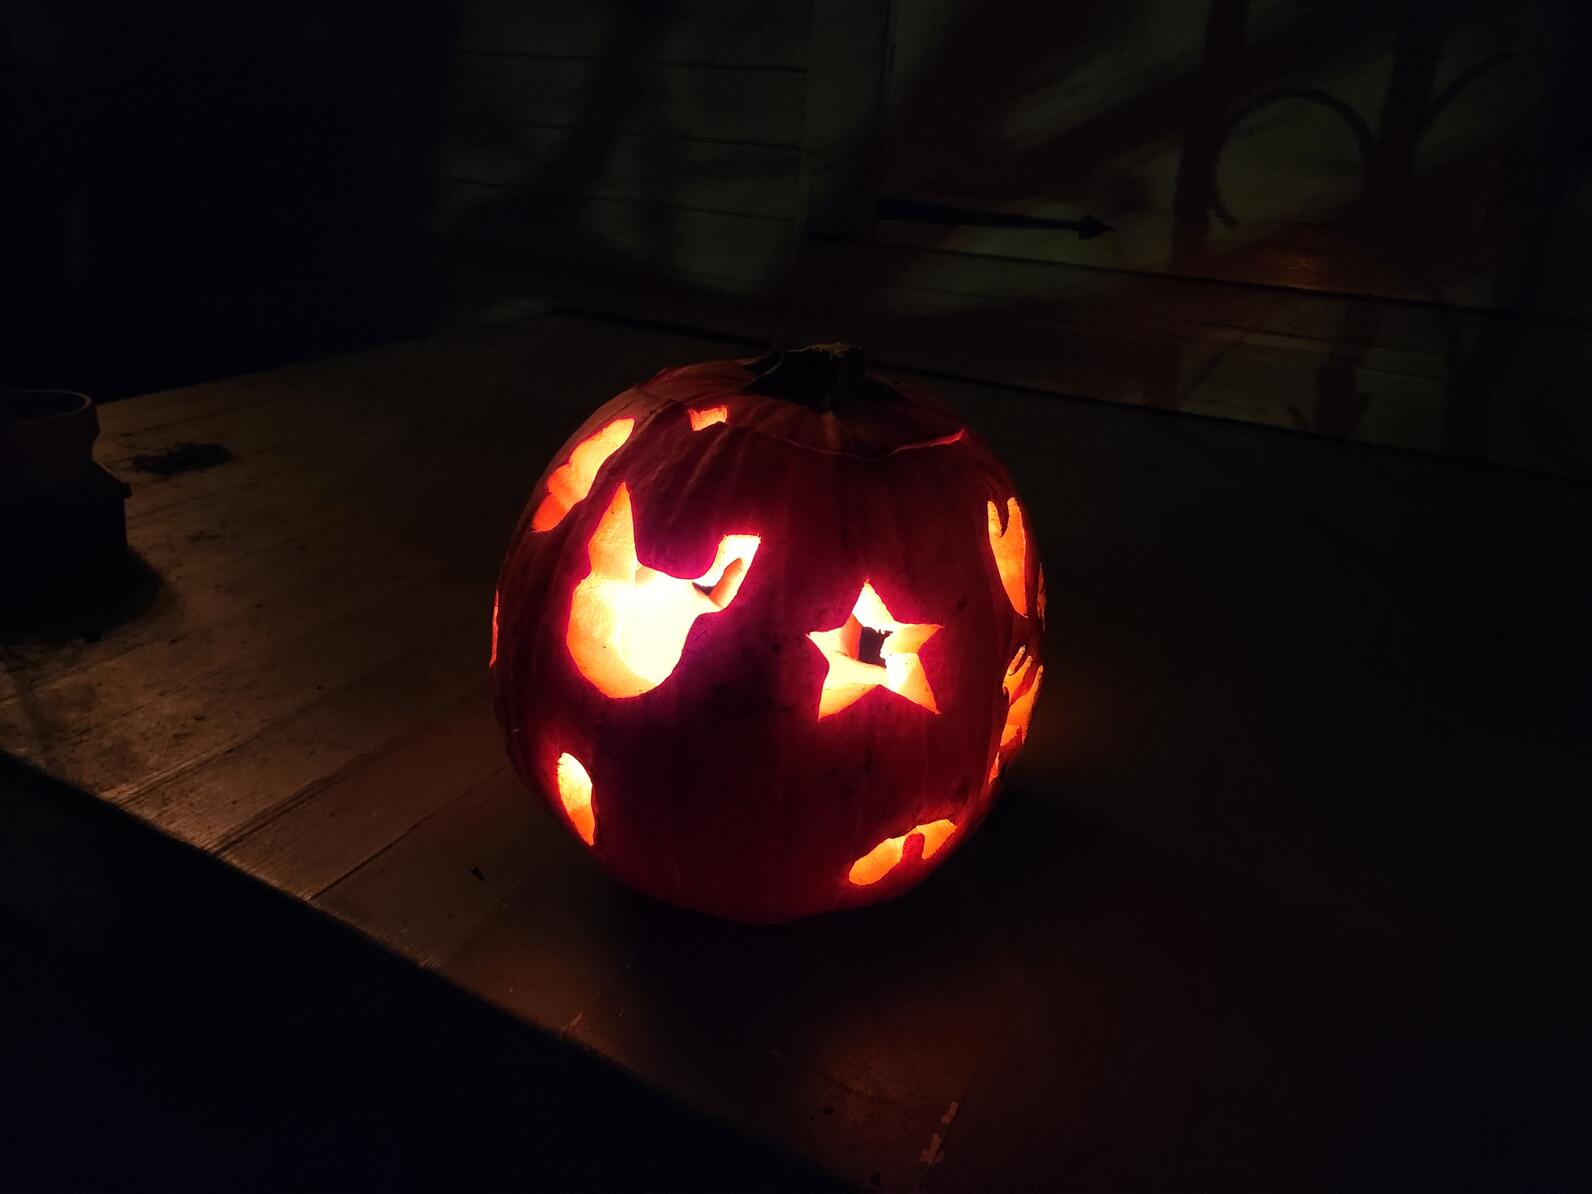 Jack o lantern in the dark with light shining out shapes cut into it.